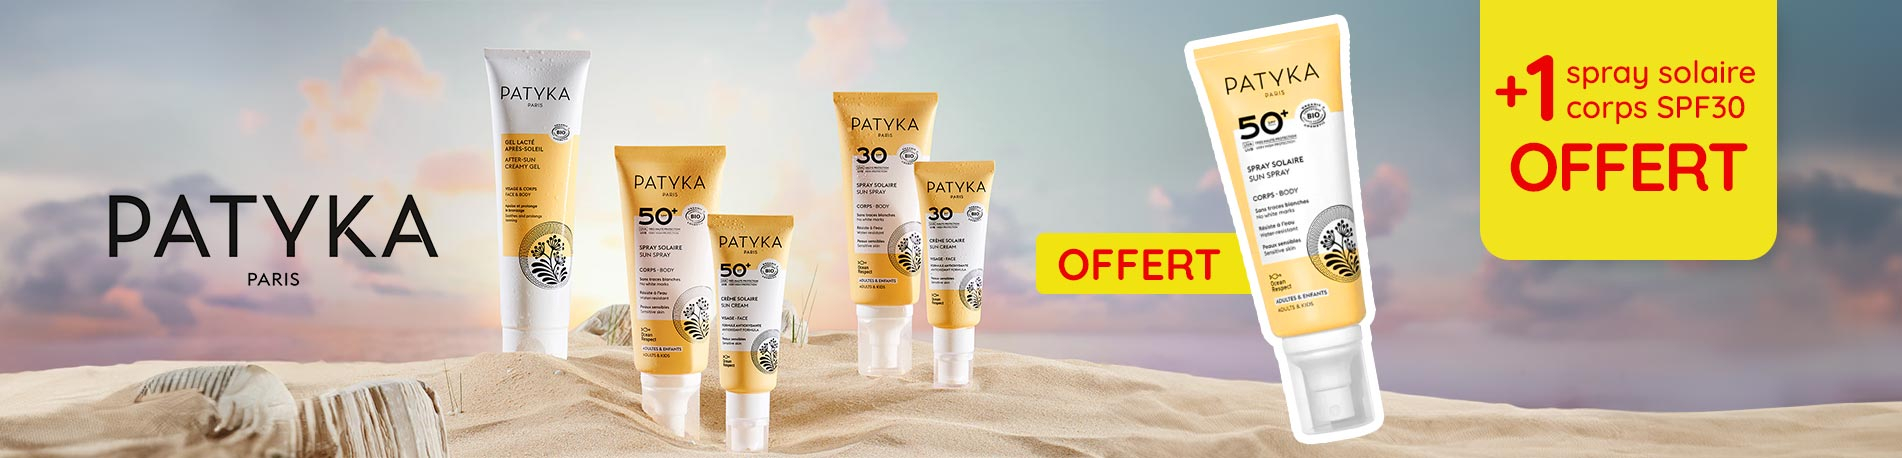 Promotion Patyka solaire